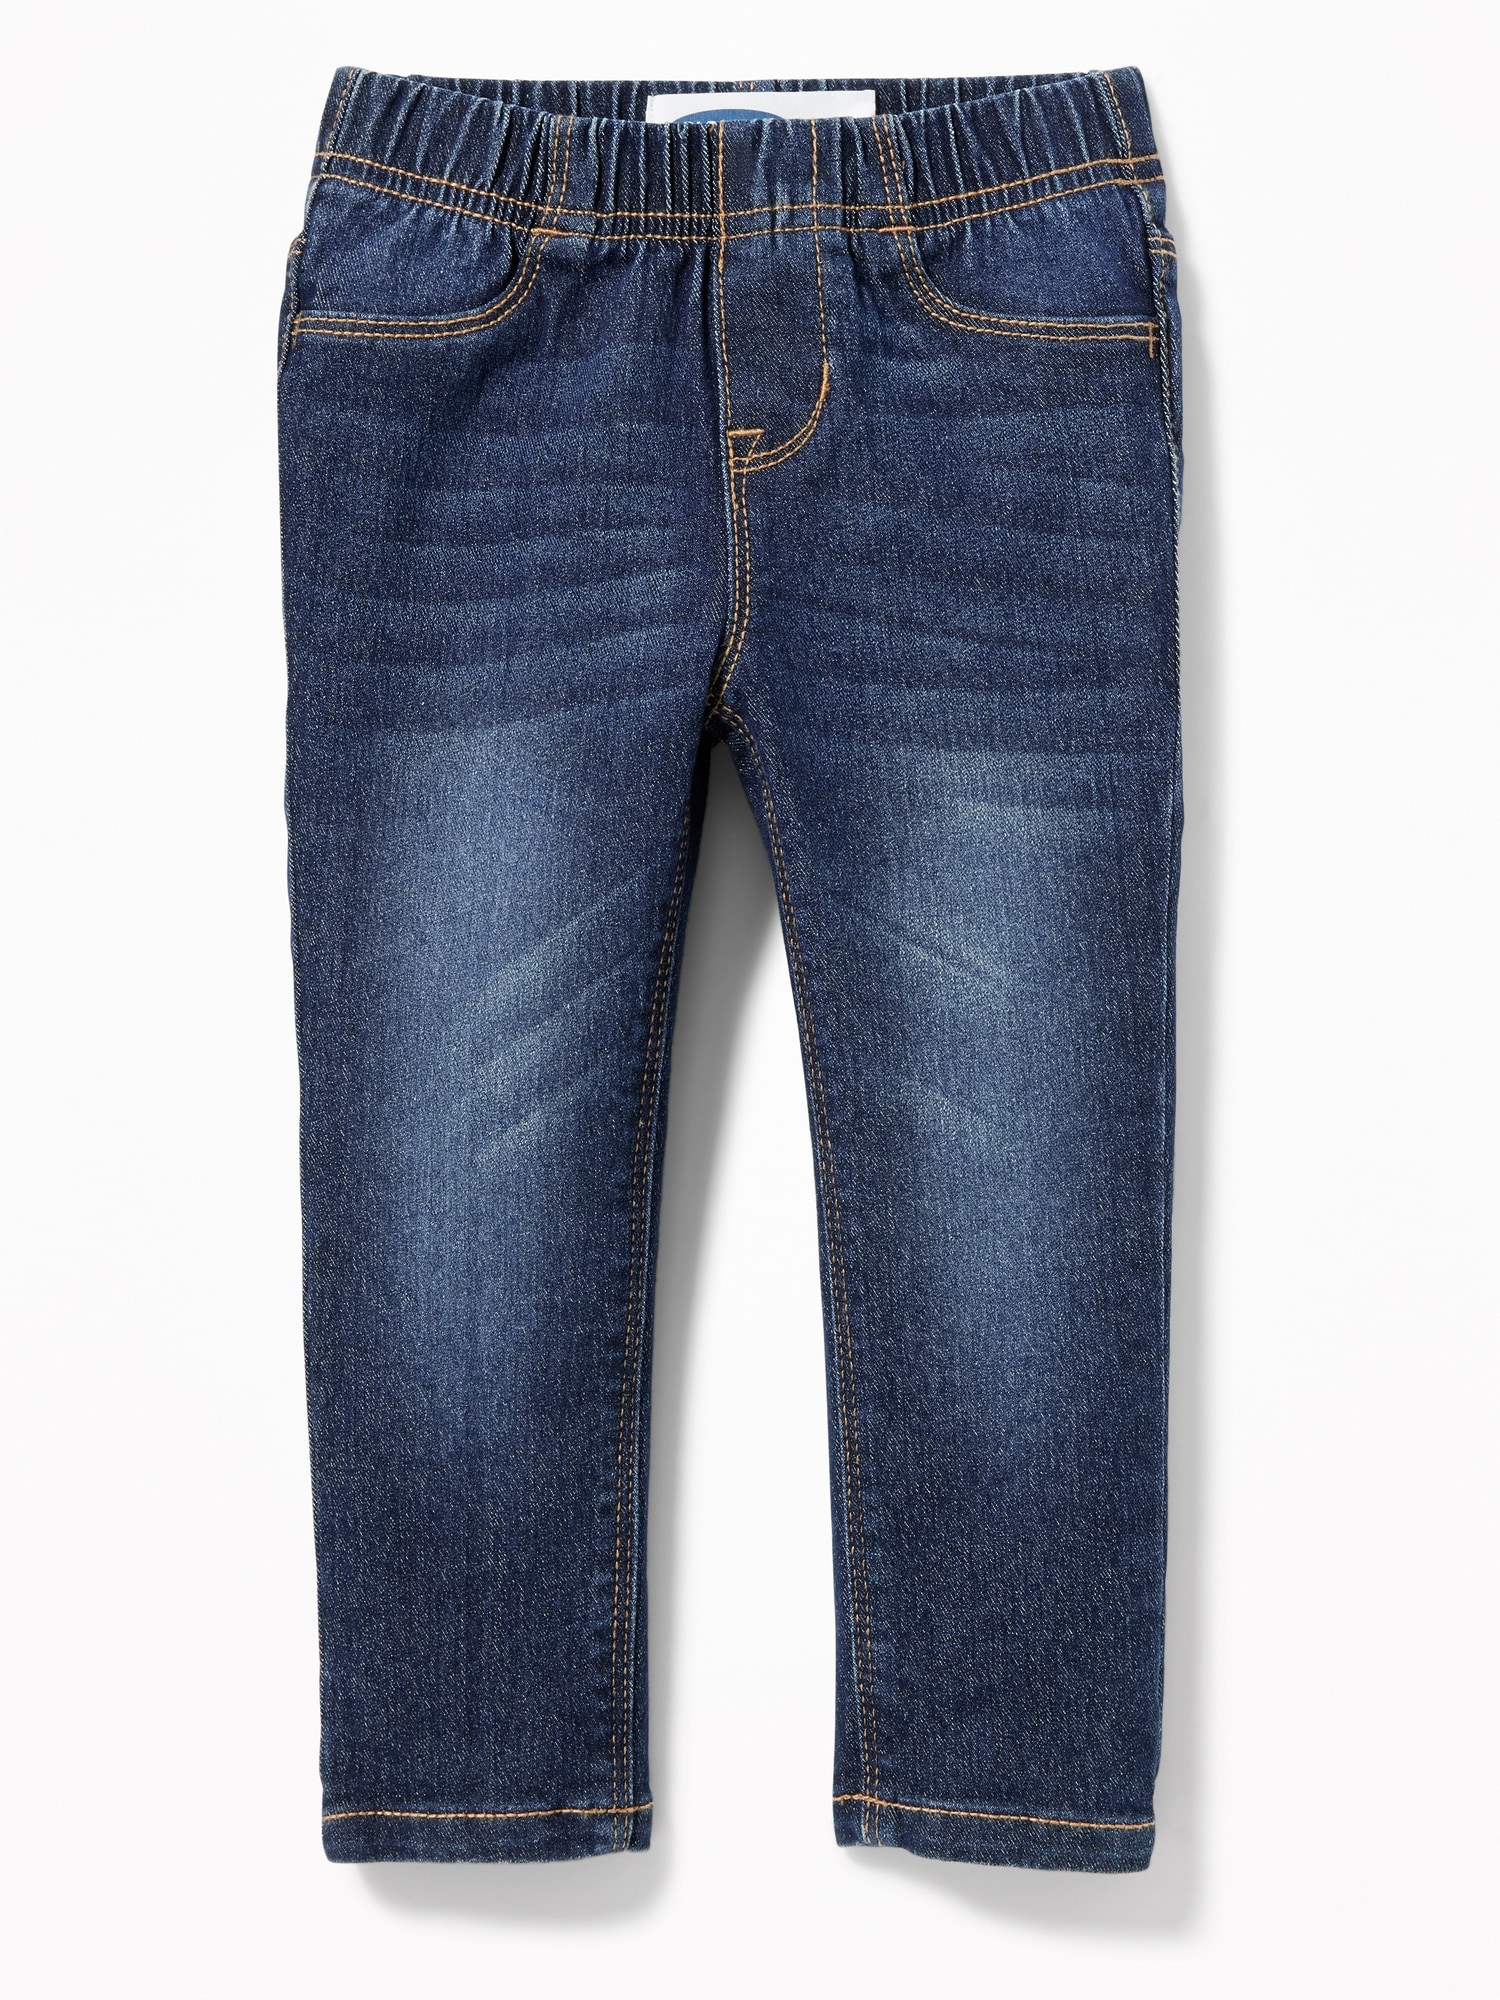 h&m cargo jeans